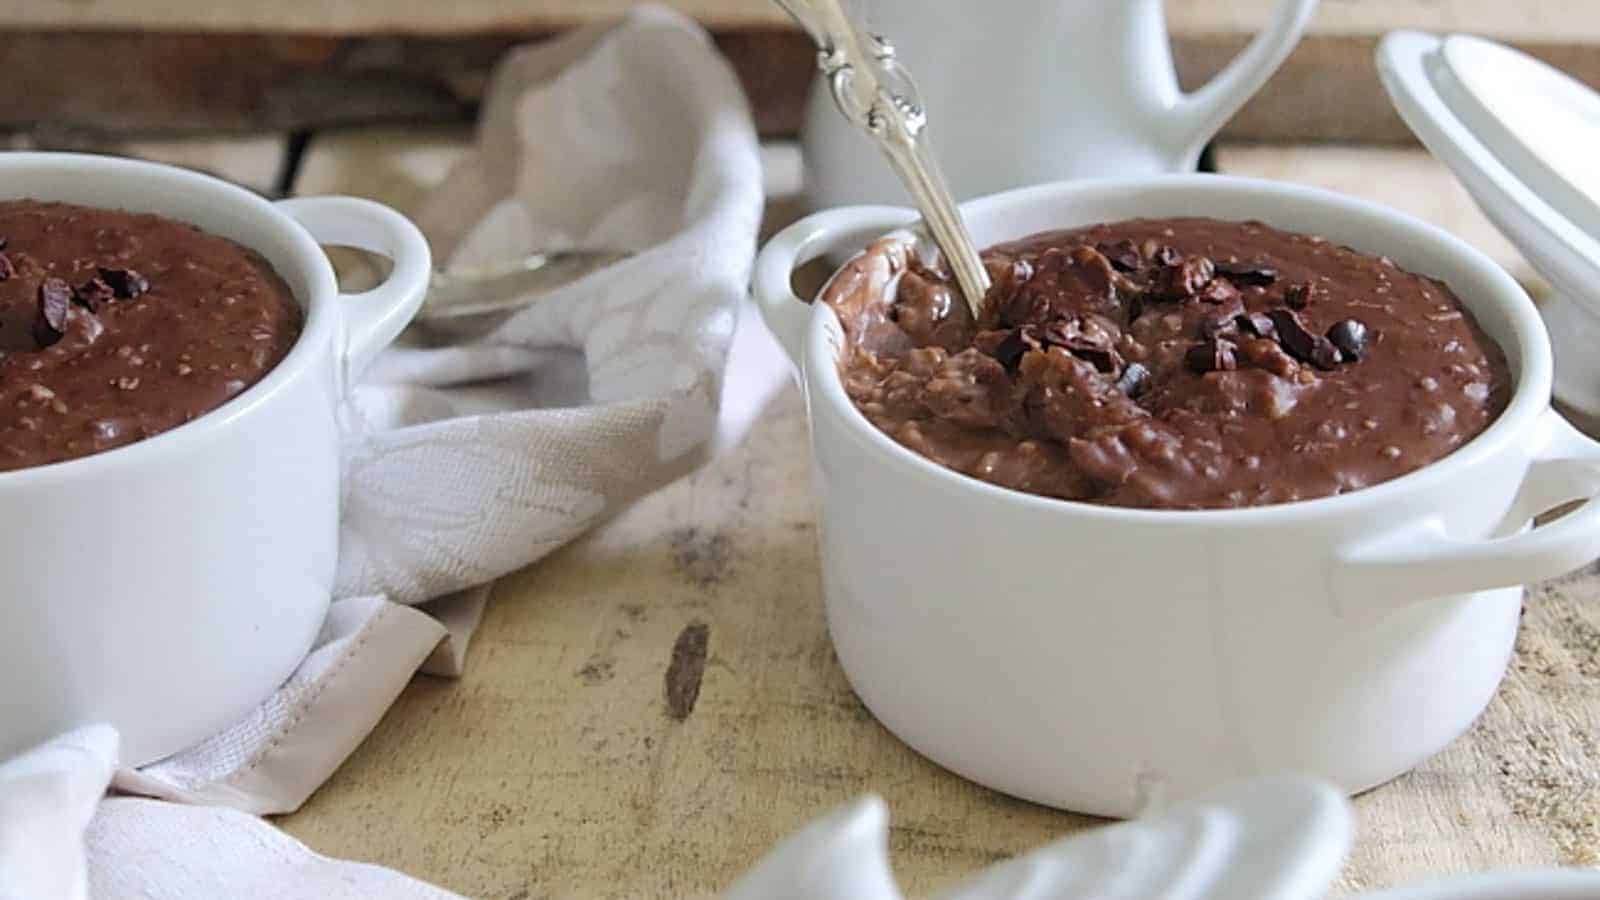 <p>Triple chocolate steel cut oatmeal is a dream come true for chocolate lovers, offering a dessert-like experience for breakfast. Creamy, chewy, and loaded with chocolate, this oatmeal is a decadent way to start your day. It’s perfect for those mornings when you crave something extra special.<br><strong>Get the Recipe: </strong><a href="https://www.runningtothekitchen.com/triple-chocolate-steel-cut-oatmeal/?utm_source=msn&utm_medium=page&utm_campaign=msn">Triple Chocolate Steel Cut Oats</a></p>